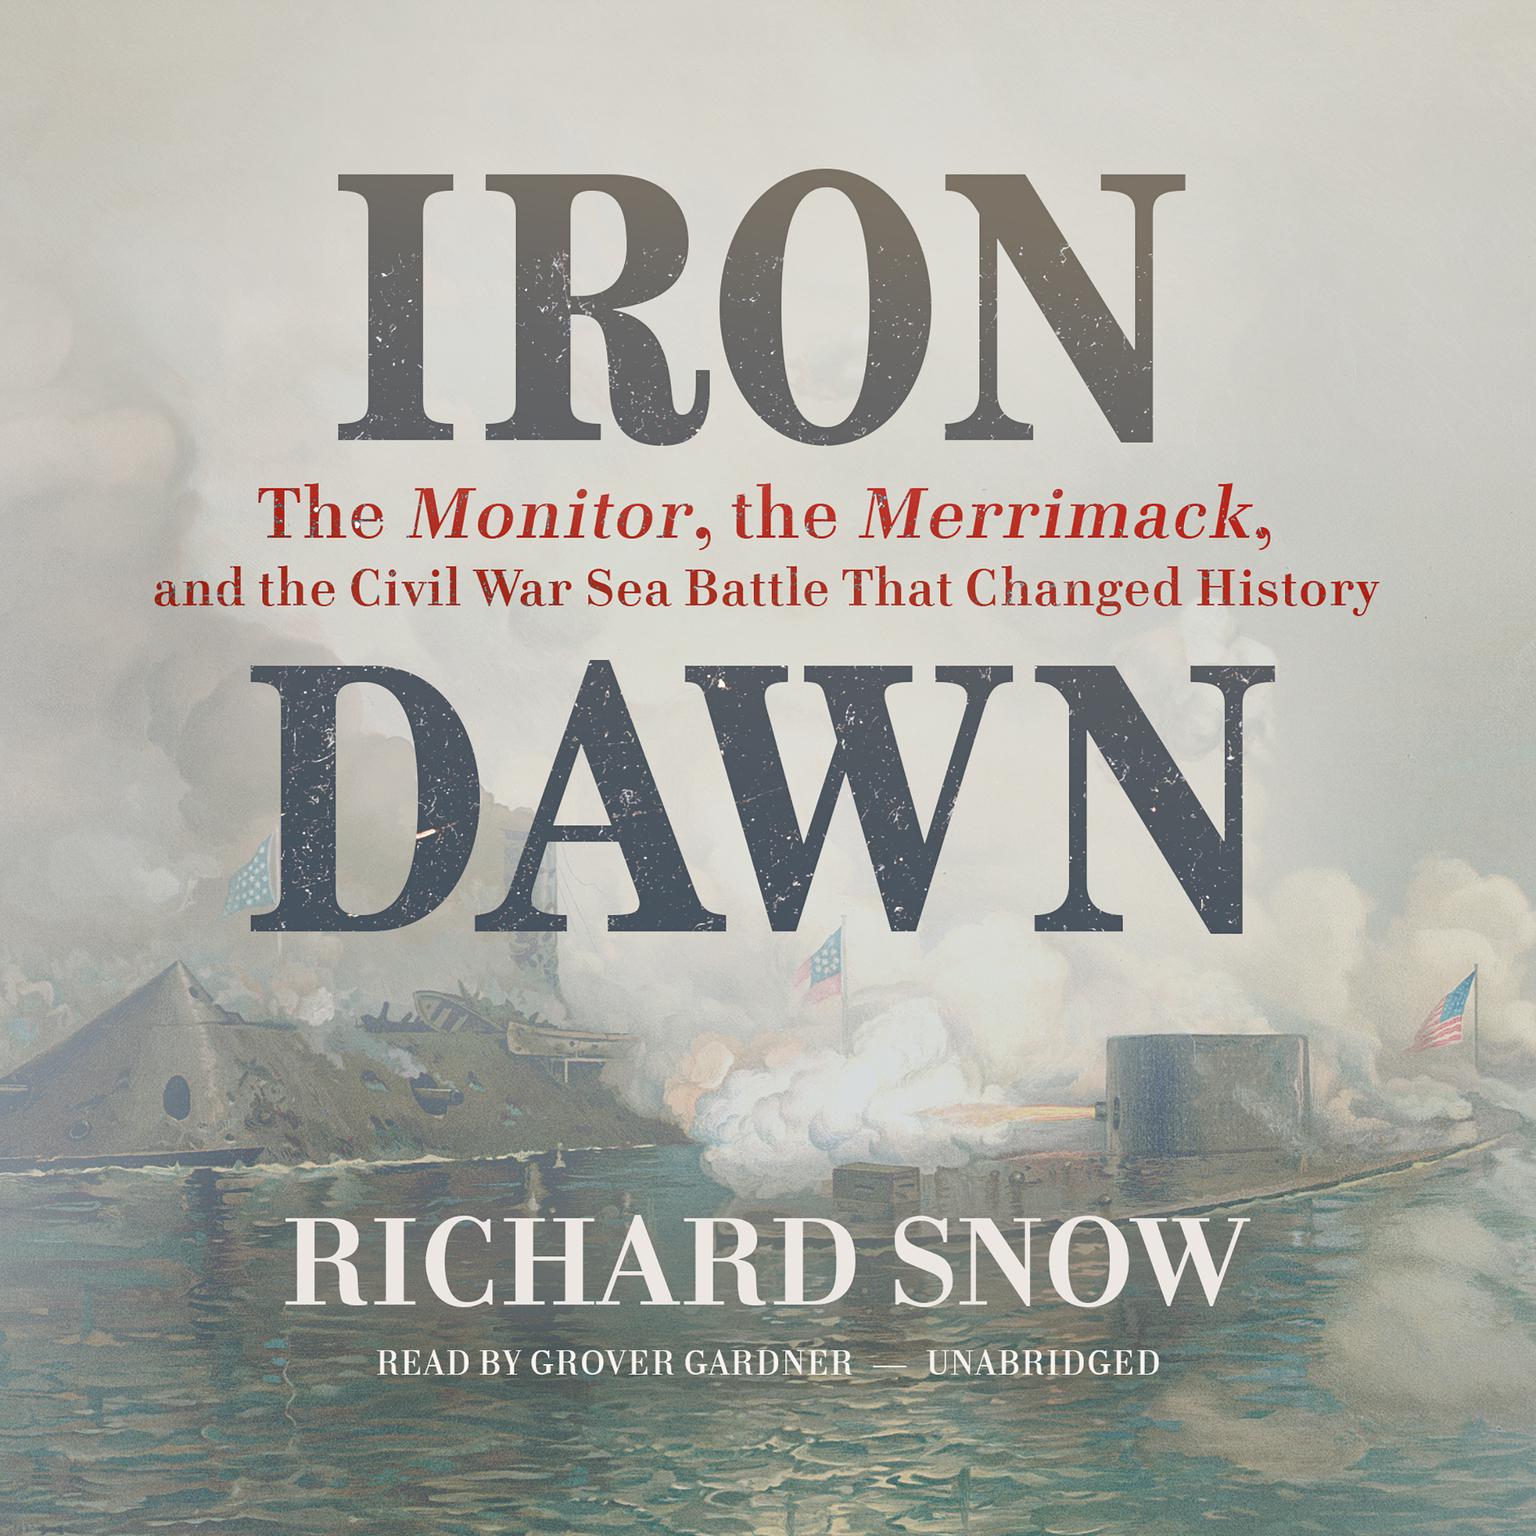 Iron Dawn: The Monitor, the Merrimack, and the Civil War Sea Battle That Changed History Audiobook, by Richard Snow